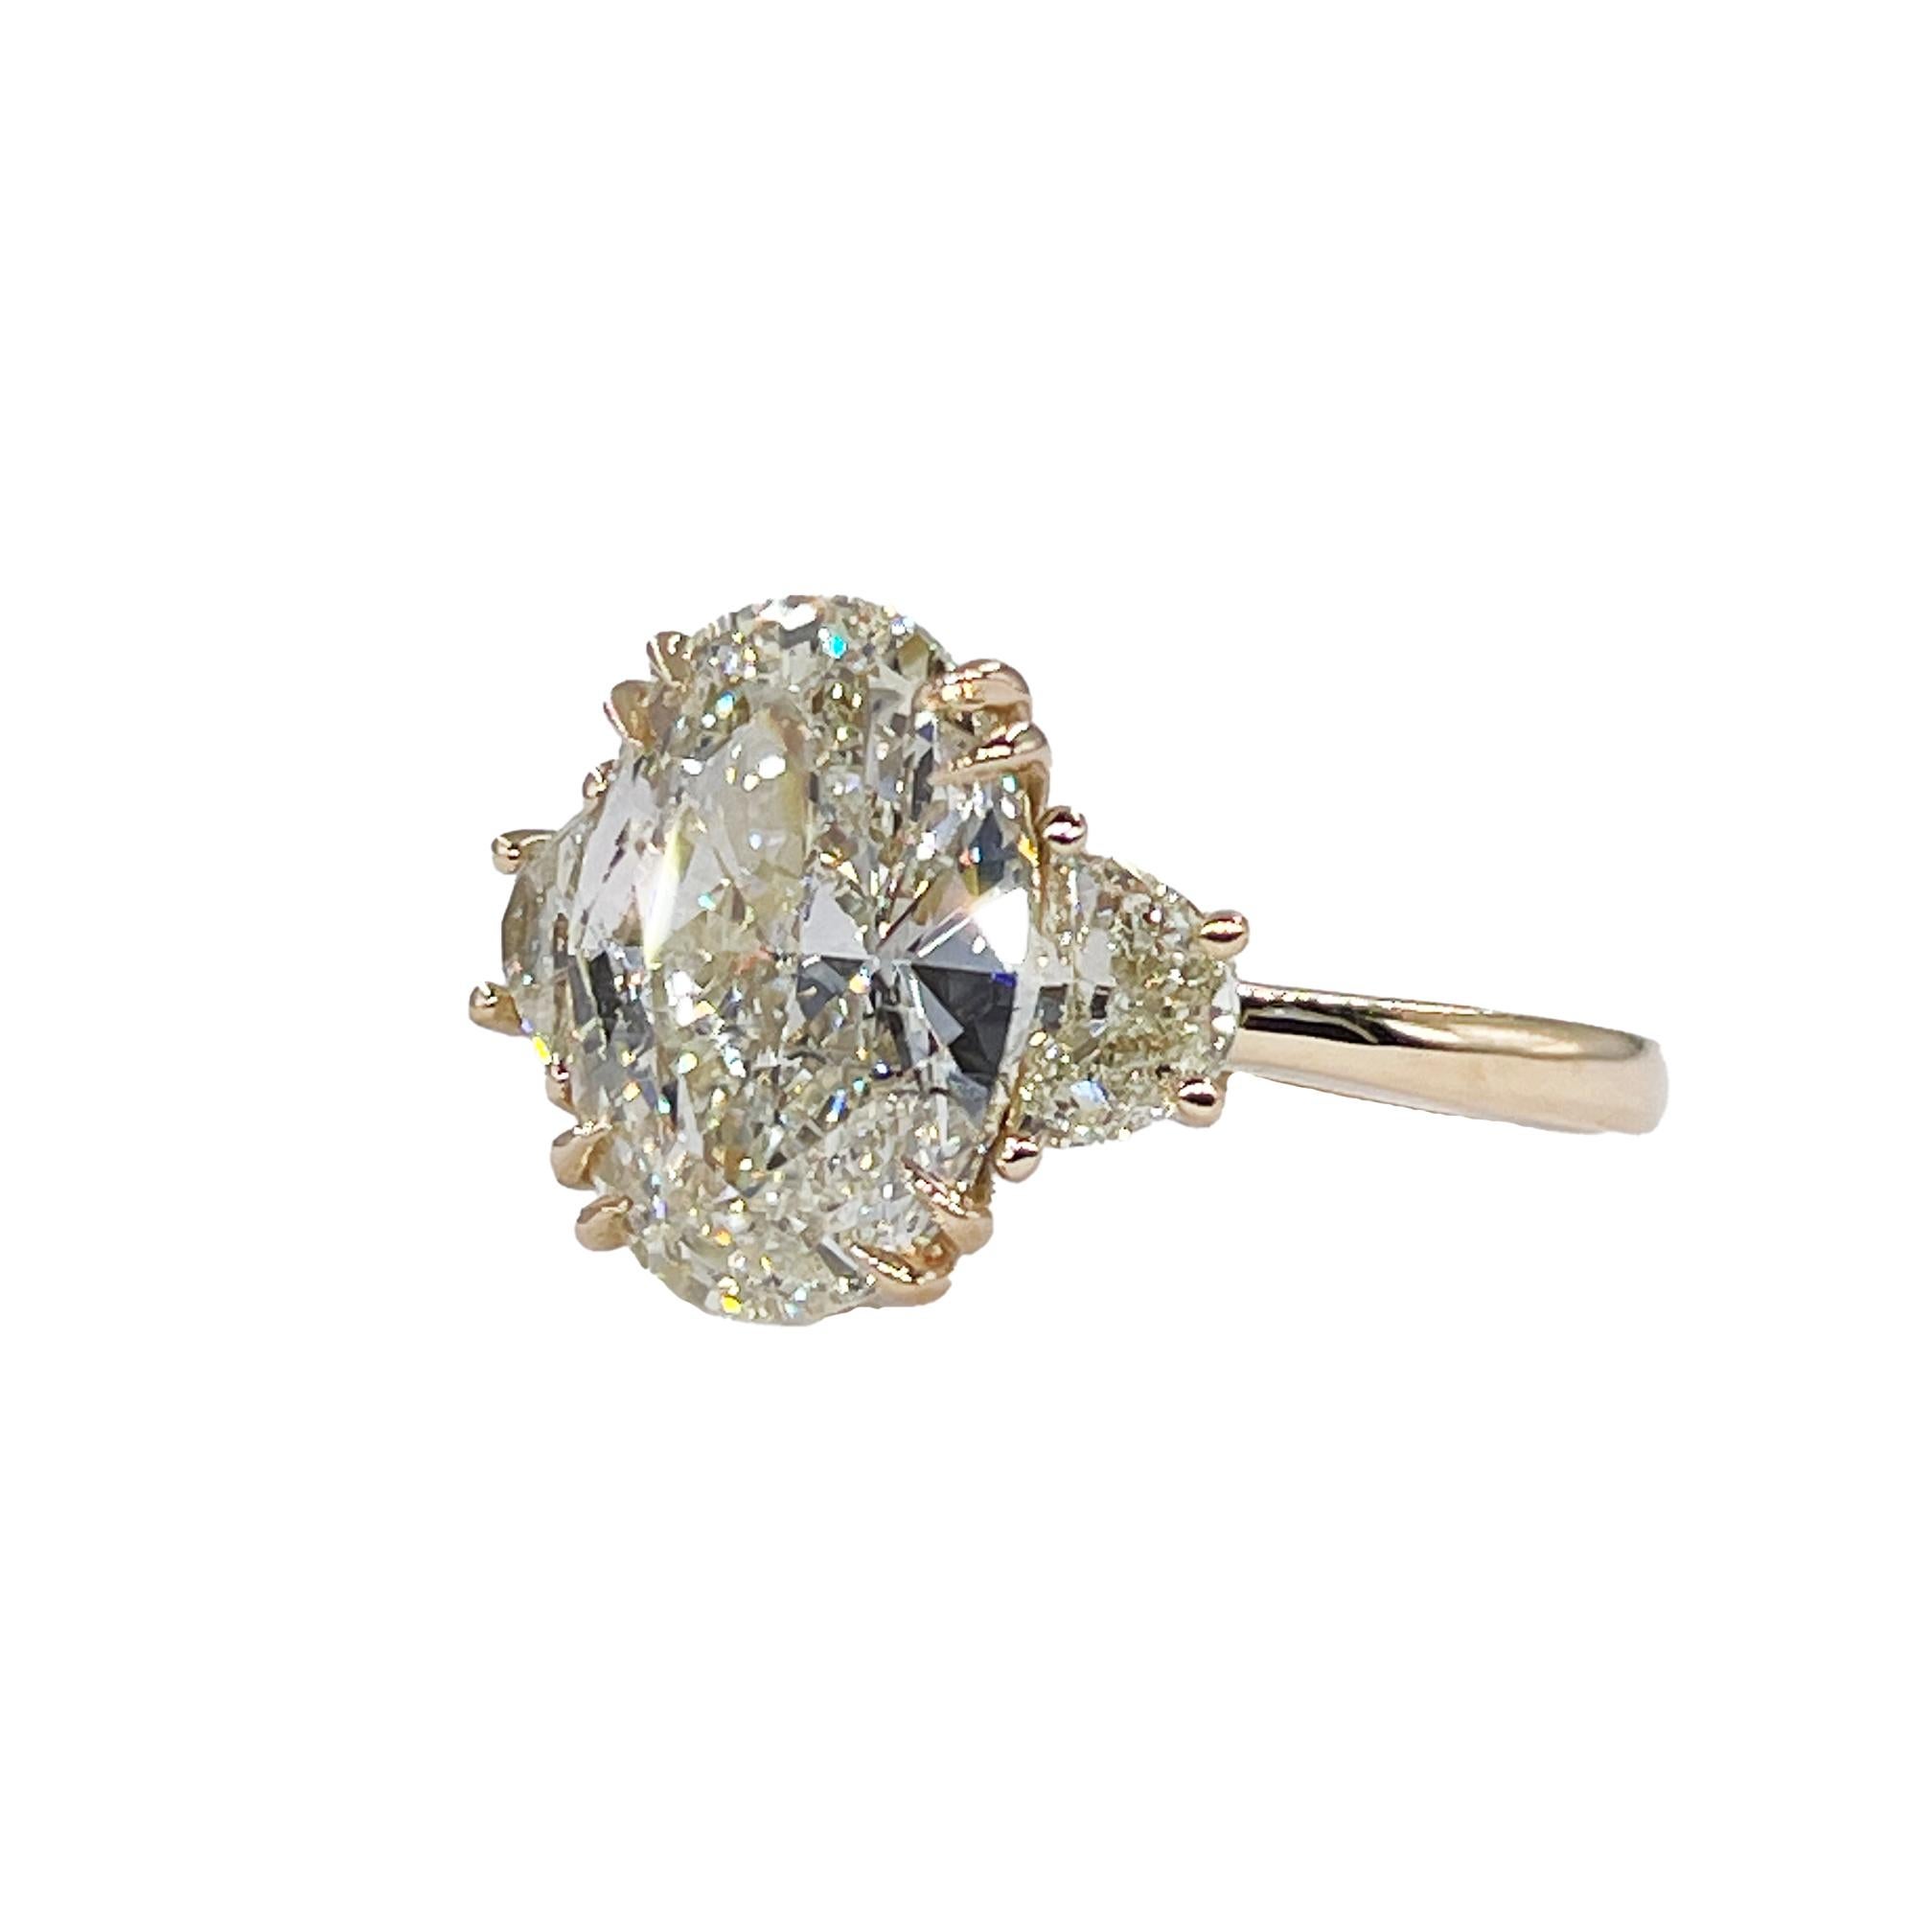 Timeless GIA 3.50ct OVAL DIAMOND Engagement Wedding Three Stone 18k Gold Vintage Ring.

This timeless trilogy ring will take your breath away!! Incredible opportunity to own a Huge 100% NATURAL, NONE-treated diamond ring at the great price.
If you